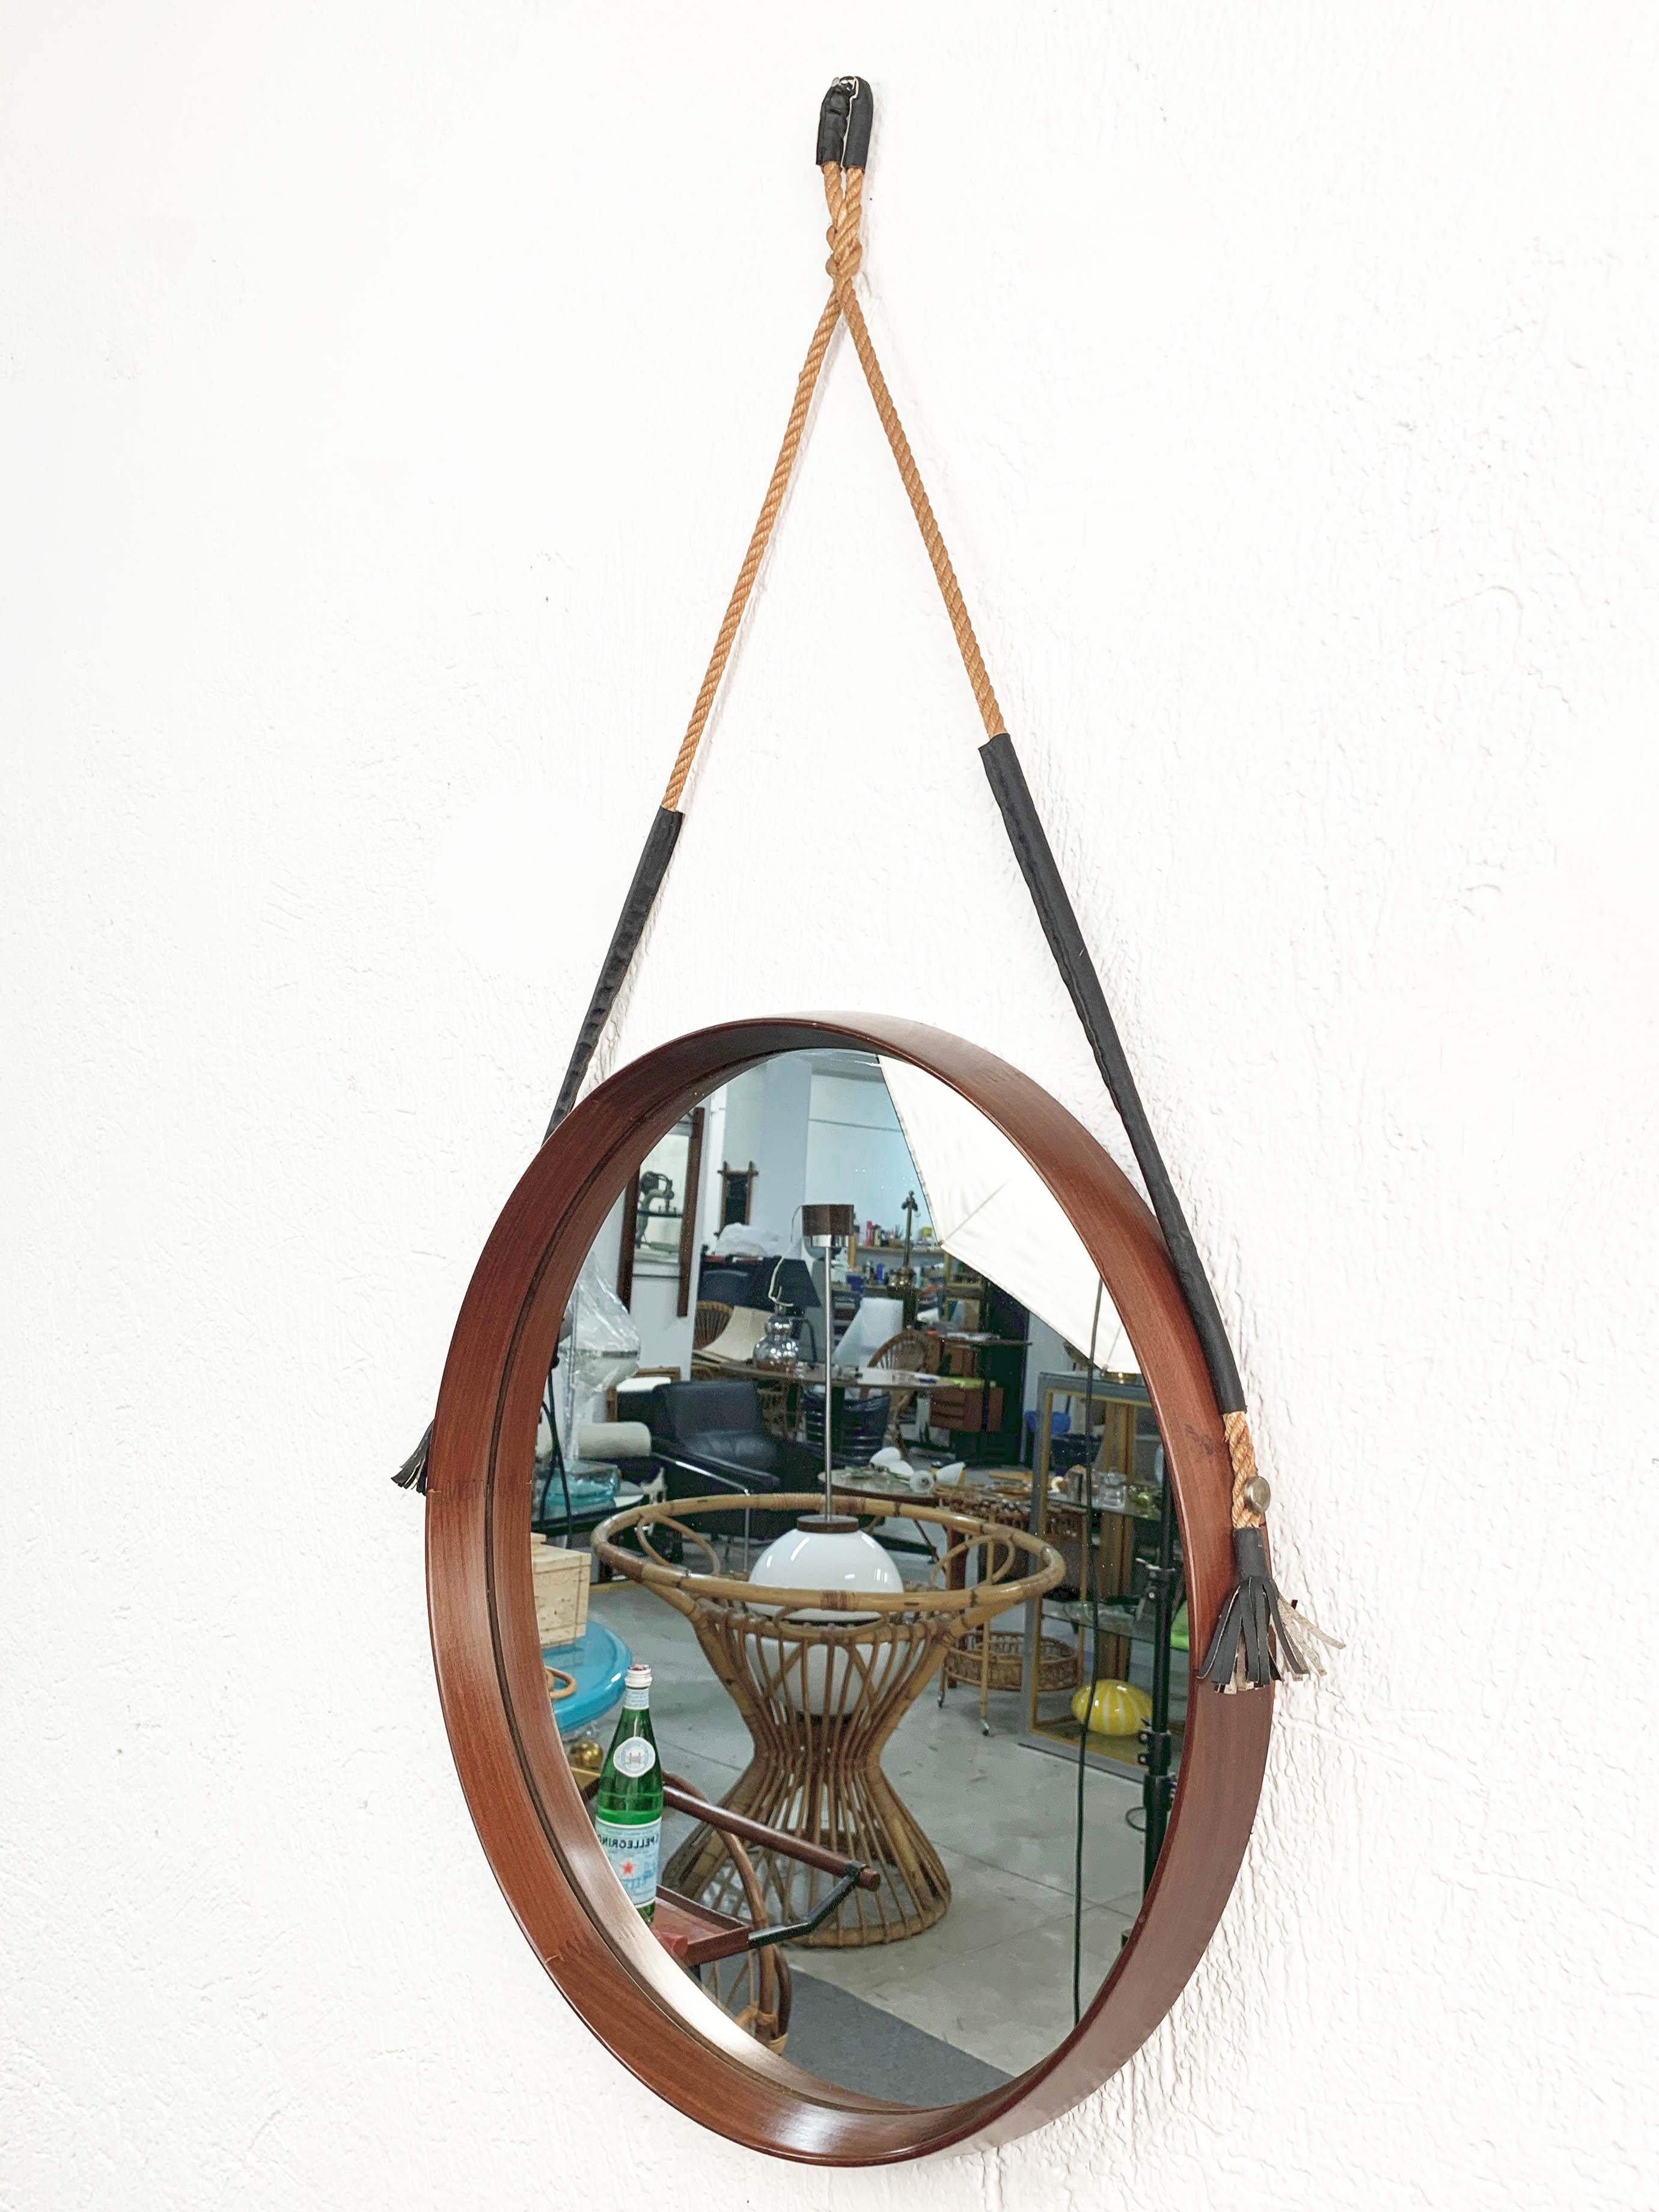 Vintage 1960s midcentury Italian round mirror with teak structure.

It can be hanged via a braided and black leather rope.

A fantastic item that will enrich a living room with its design and patina.